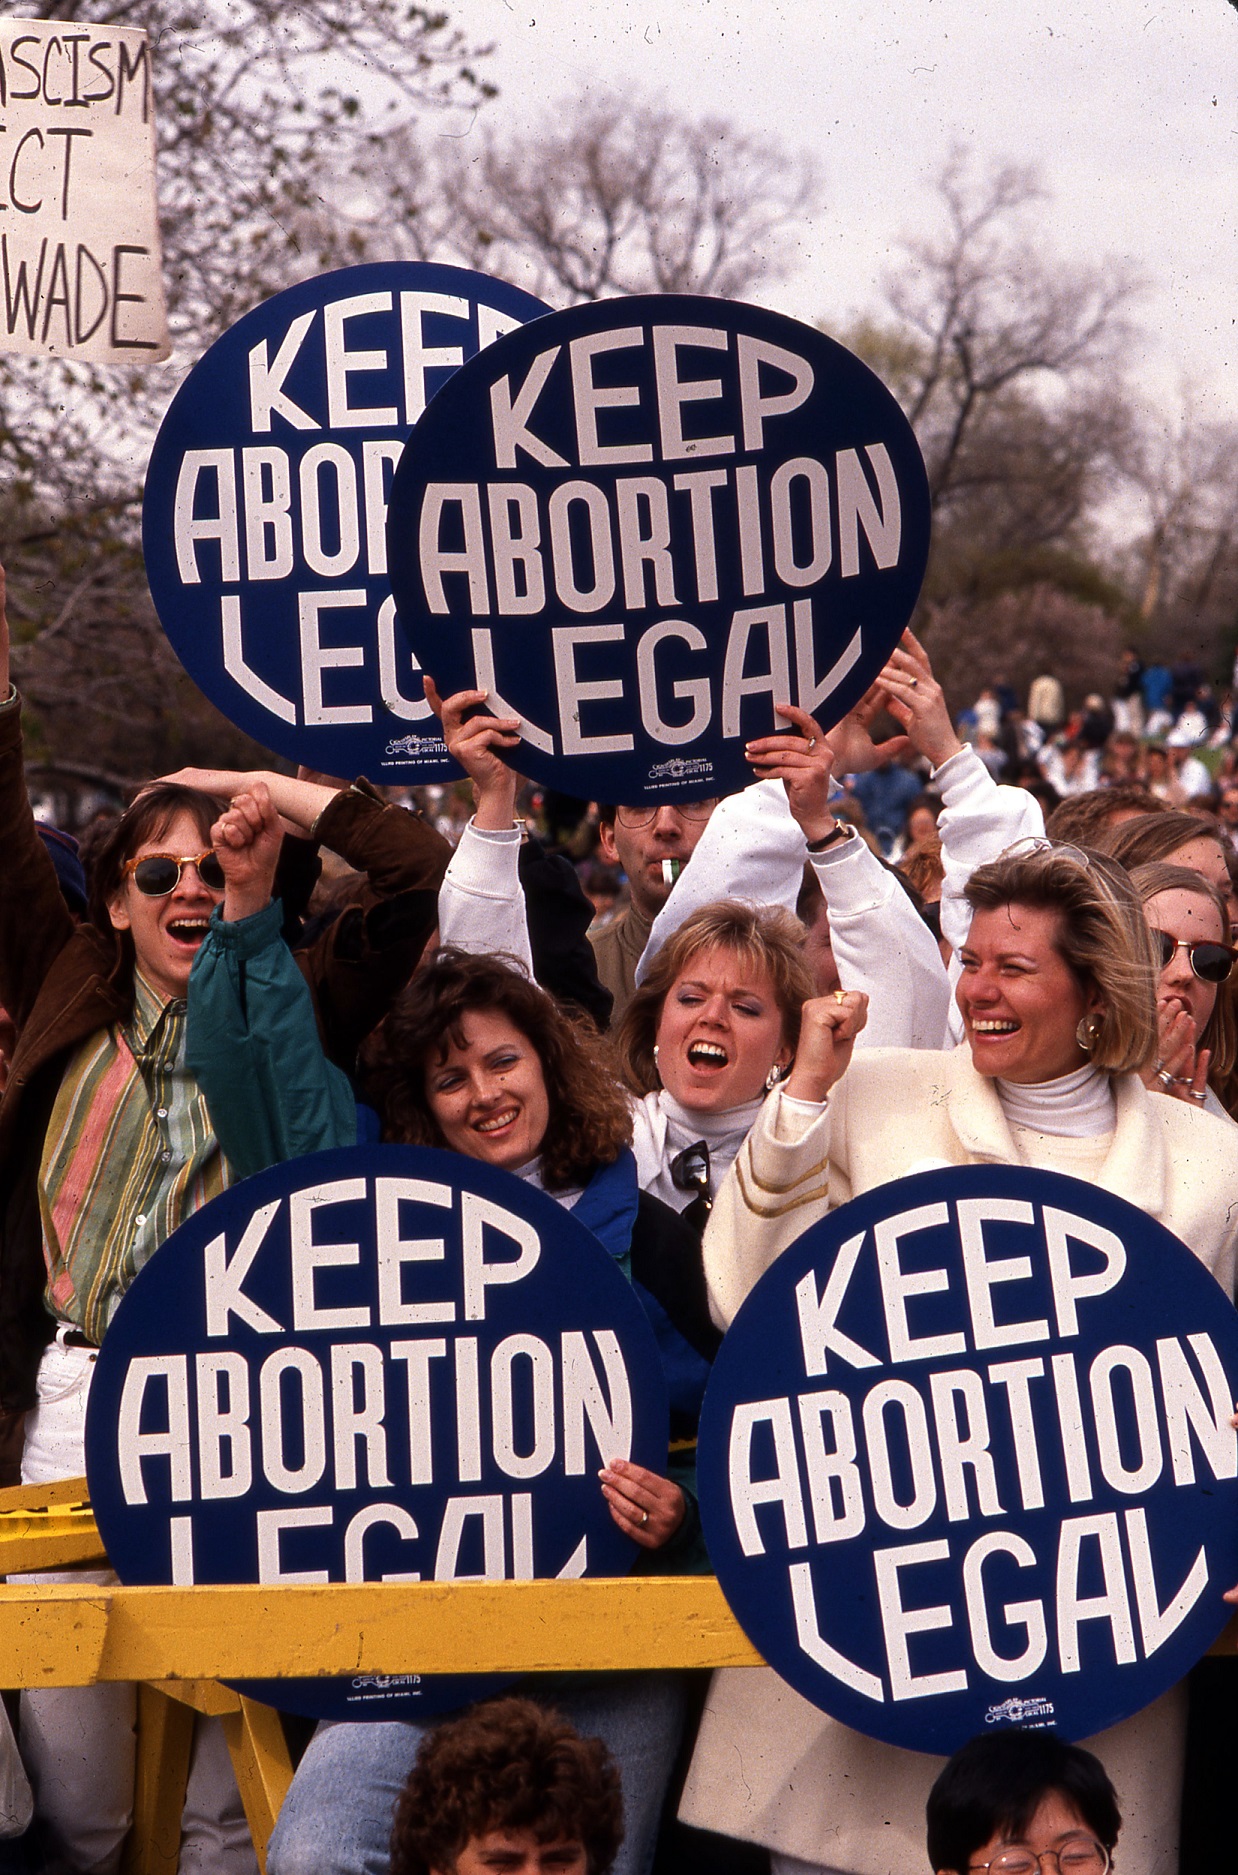 Pro-Choice Rally where more than 300,000 demonstrators marched on the Capitol, April, 1989